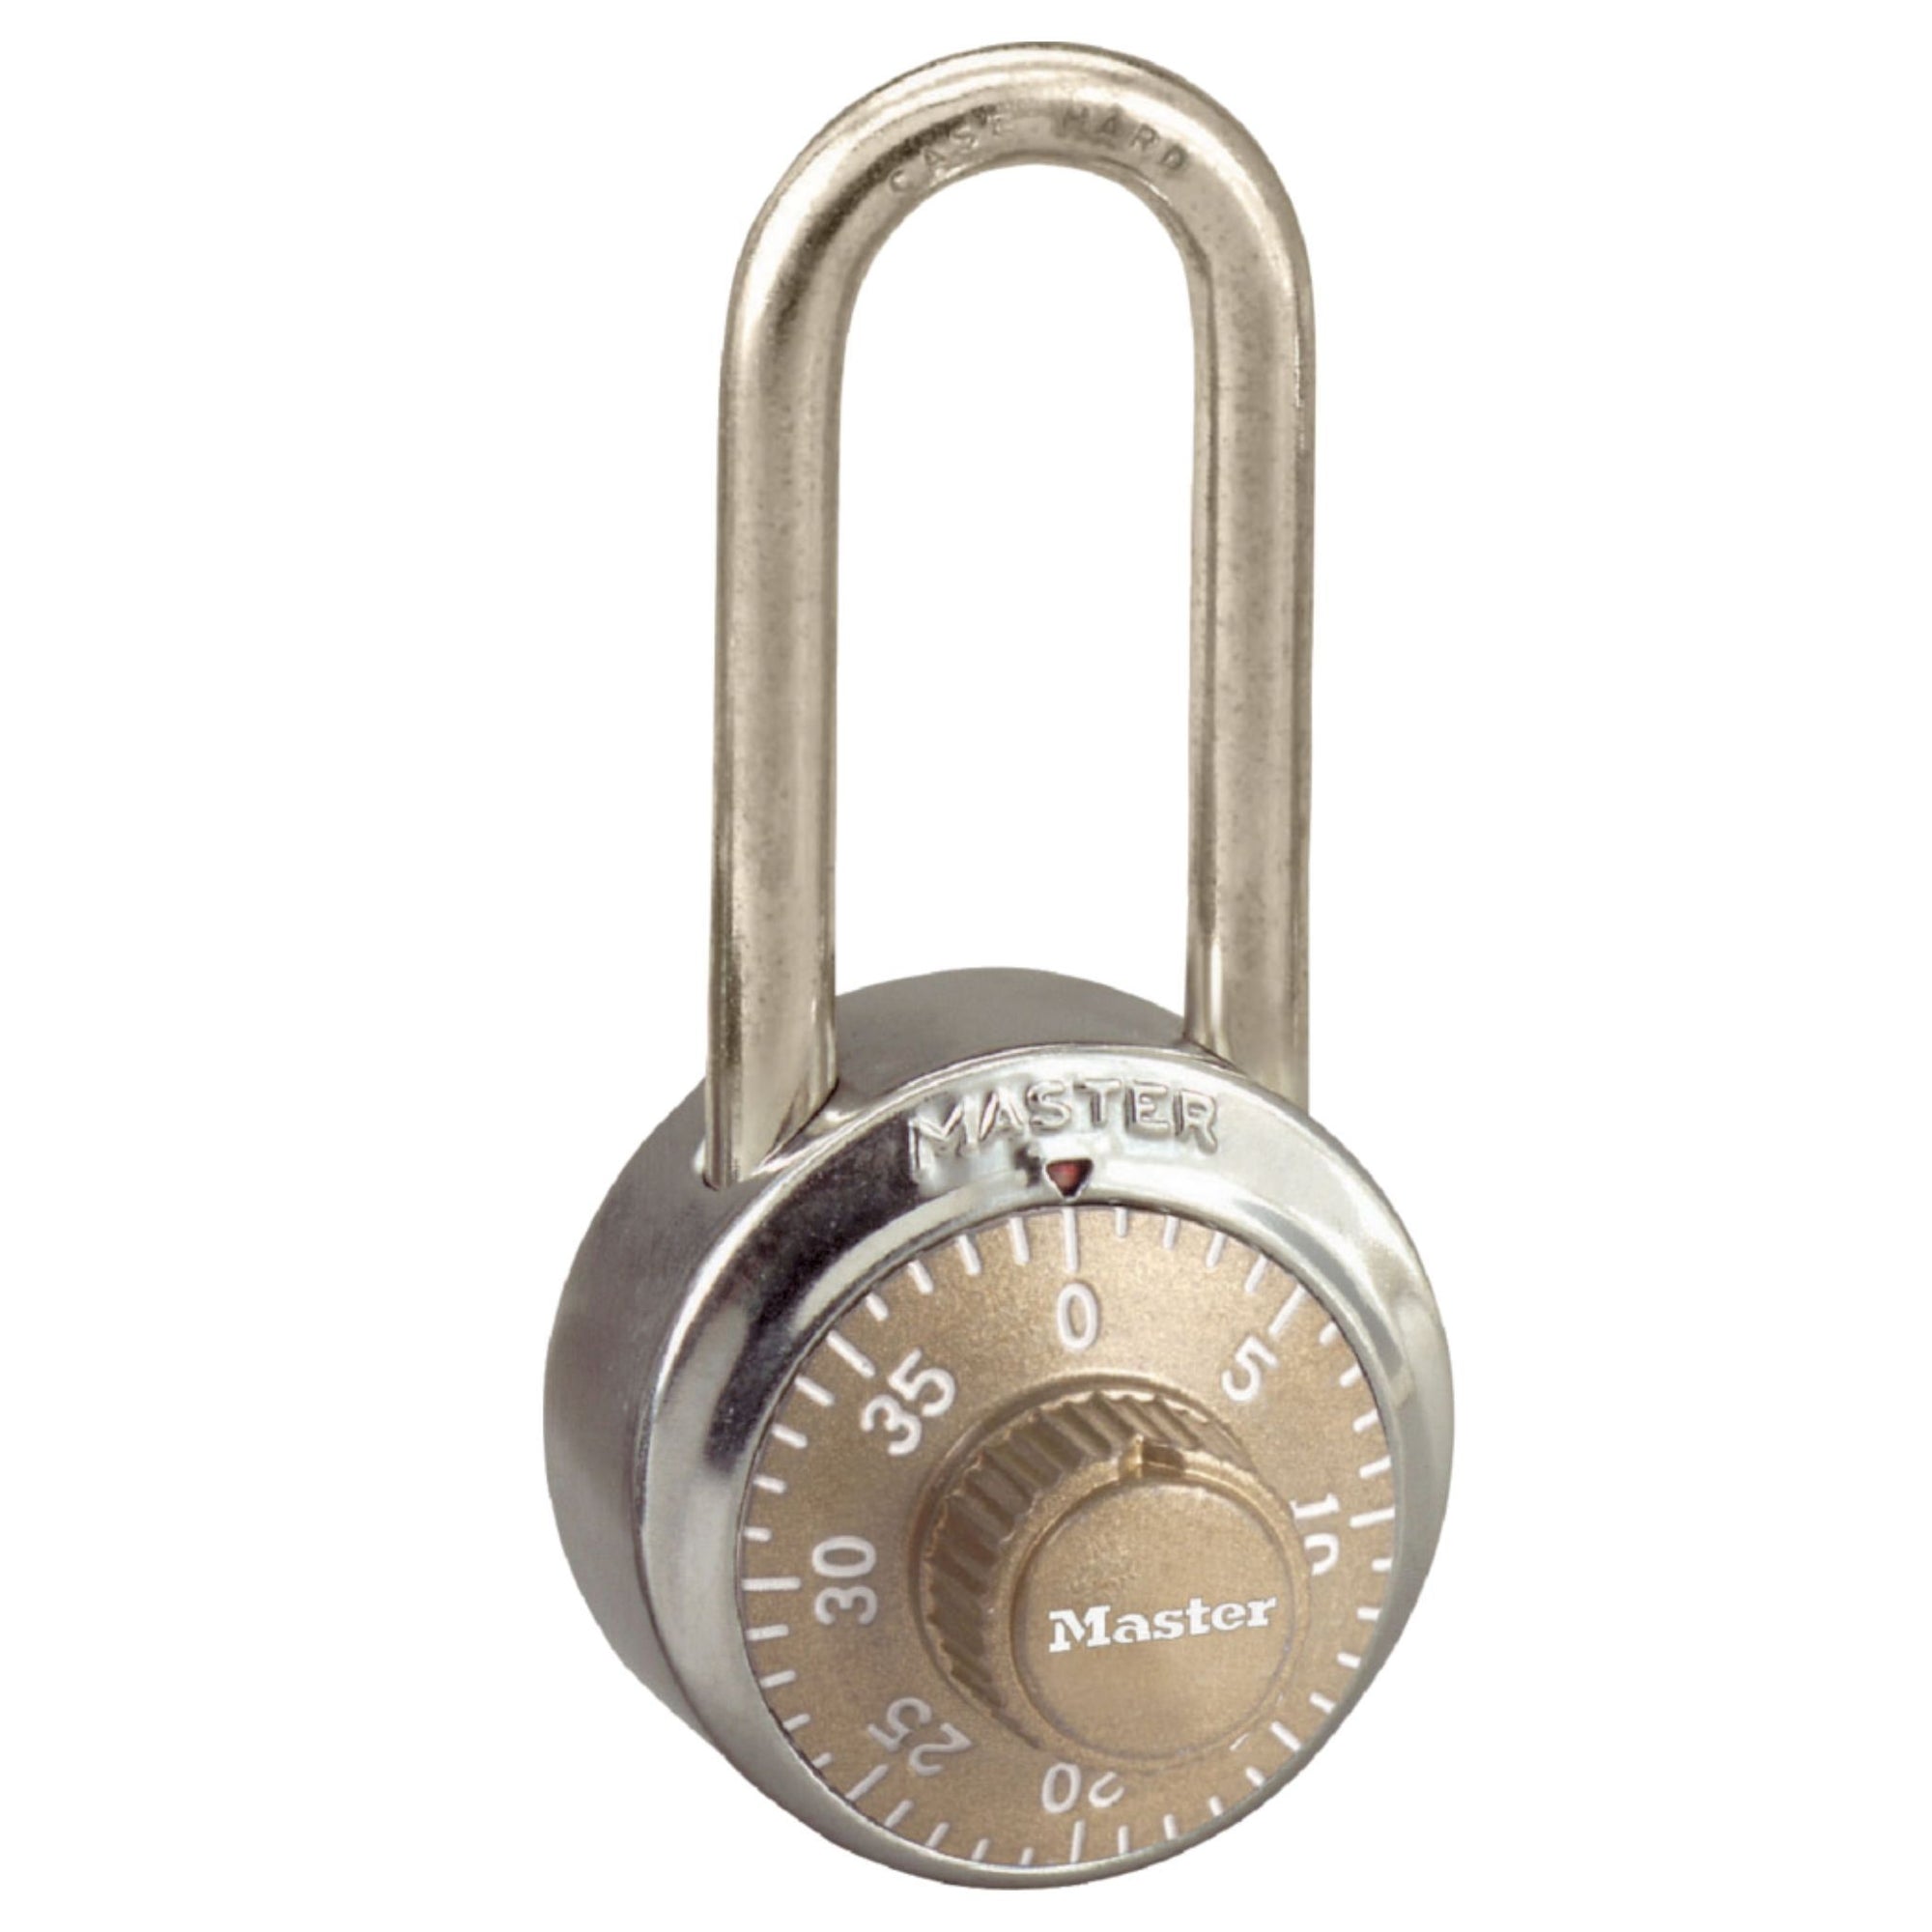 Master Lock No. 1500LH Combination Locker Lock with 2-1/2" Shackle - The Lock Source